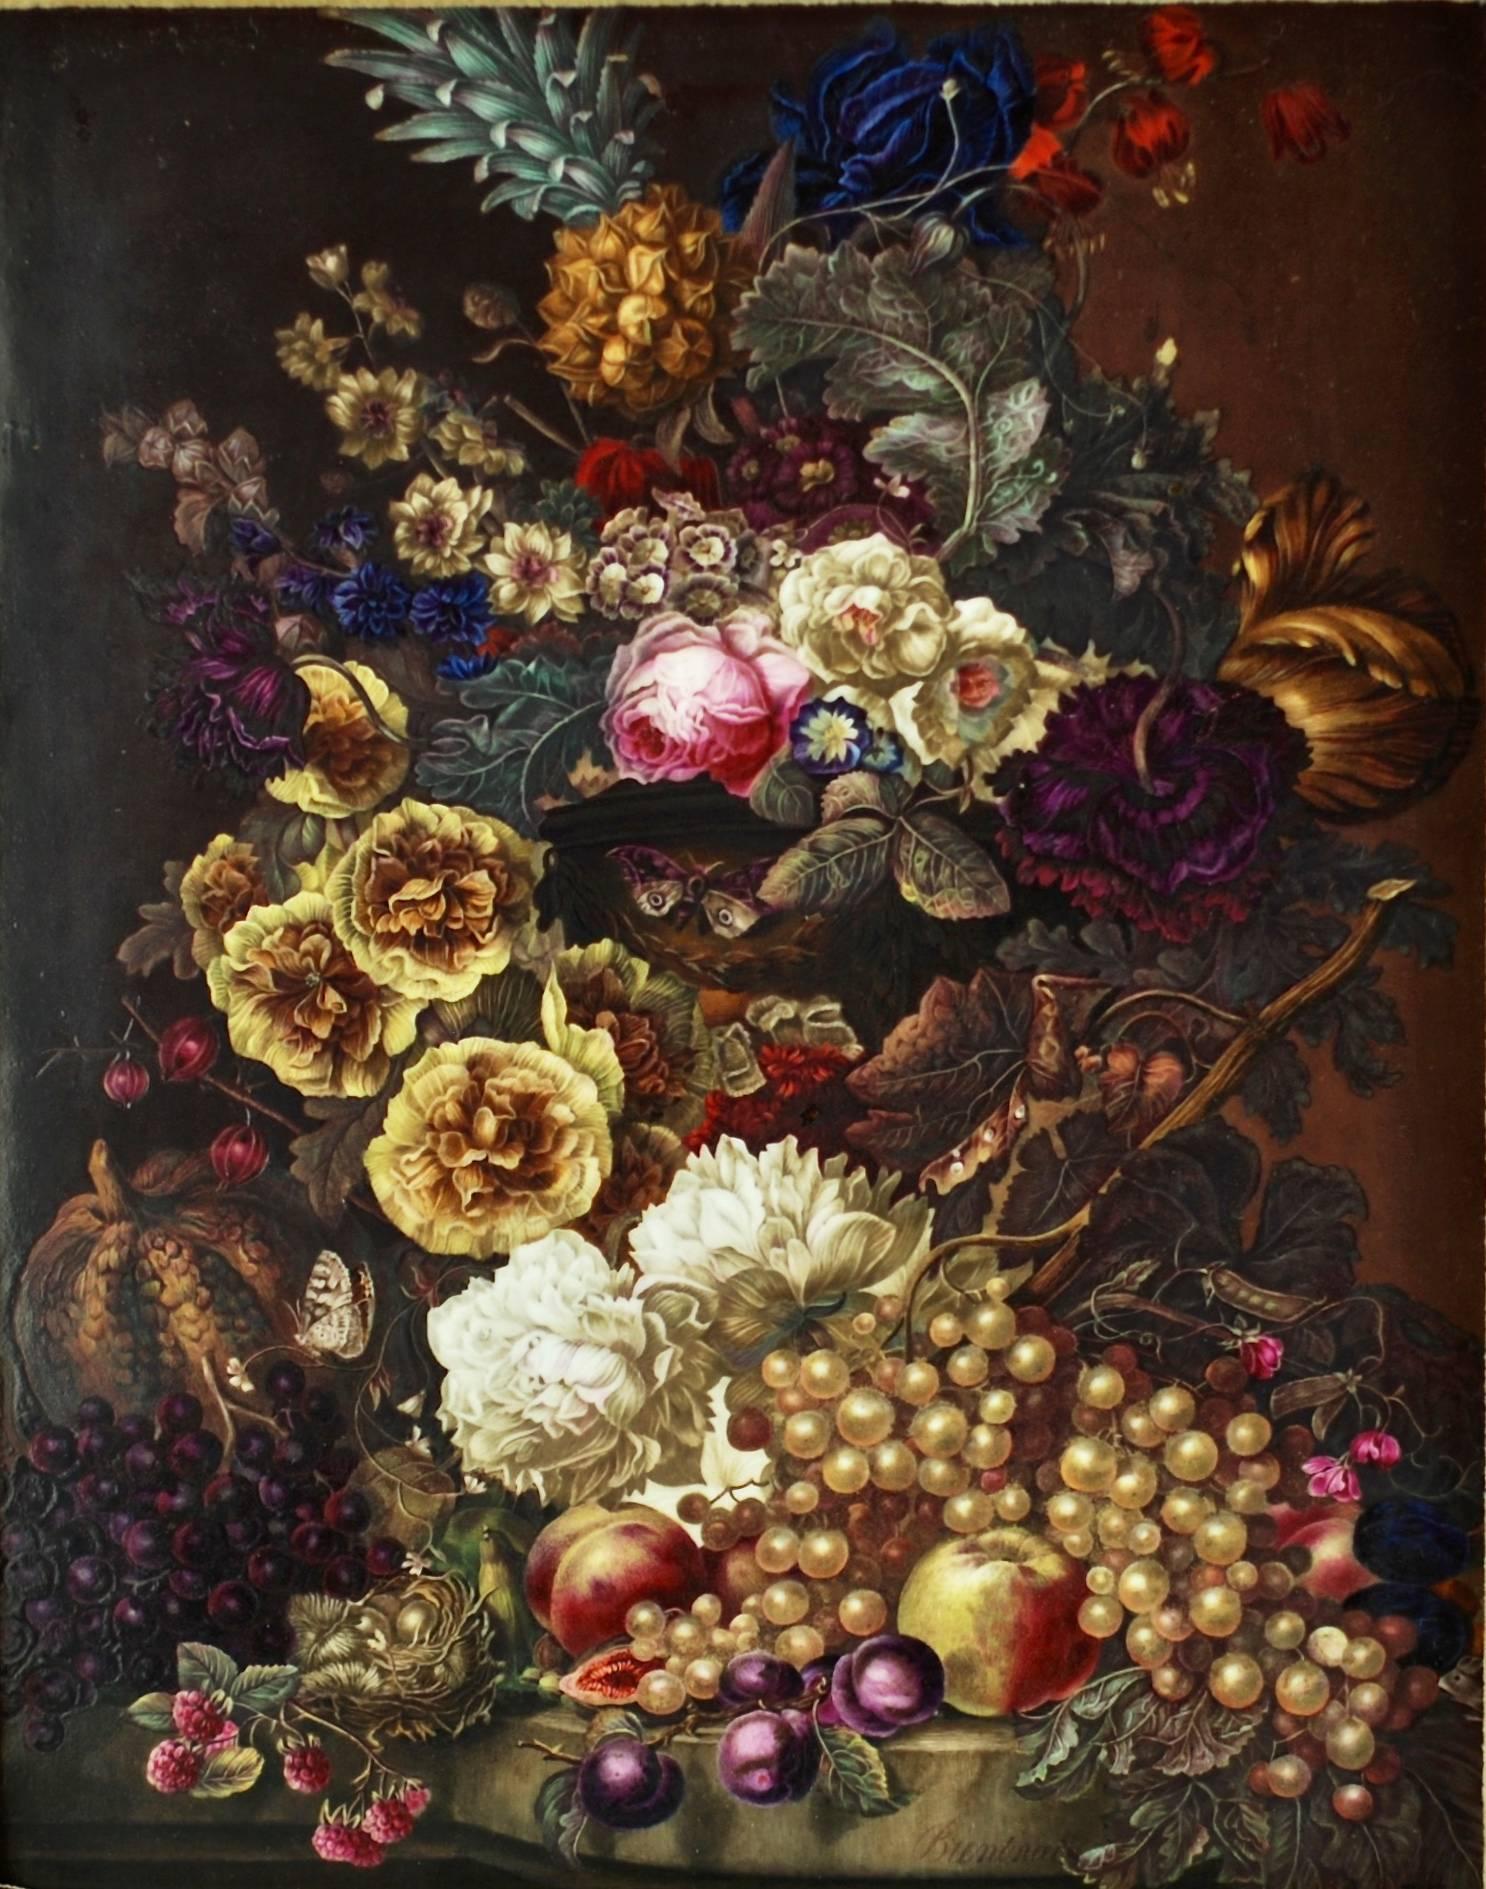 This exquisite still life was executed on porcelain by English painter Thomas Brentnall (1799-1869), noted flower artist for well-regarded porcelain factories Crown Derby and Coalport.

The botanical artwork has been meticulously hand-painted in